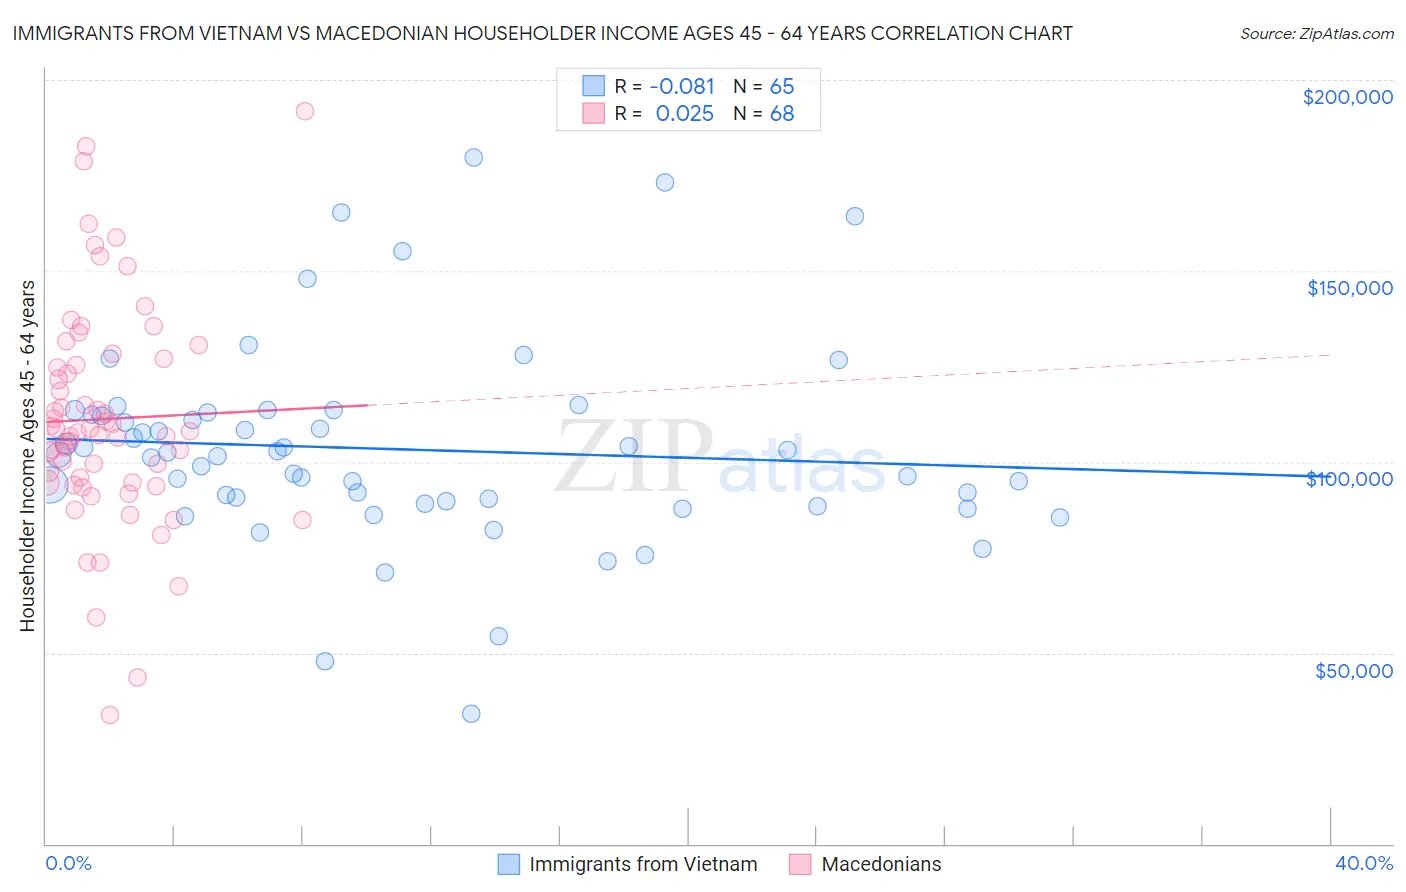 Immigrants from Vietnam vs Macedonian Householder Income Ages 45 - 64 years